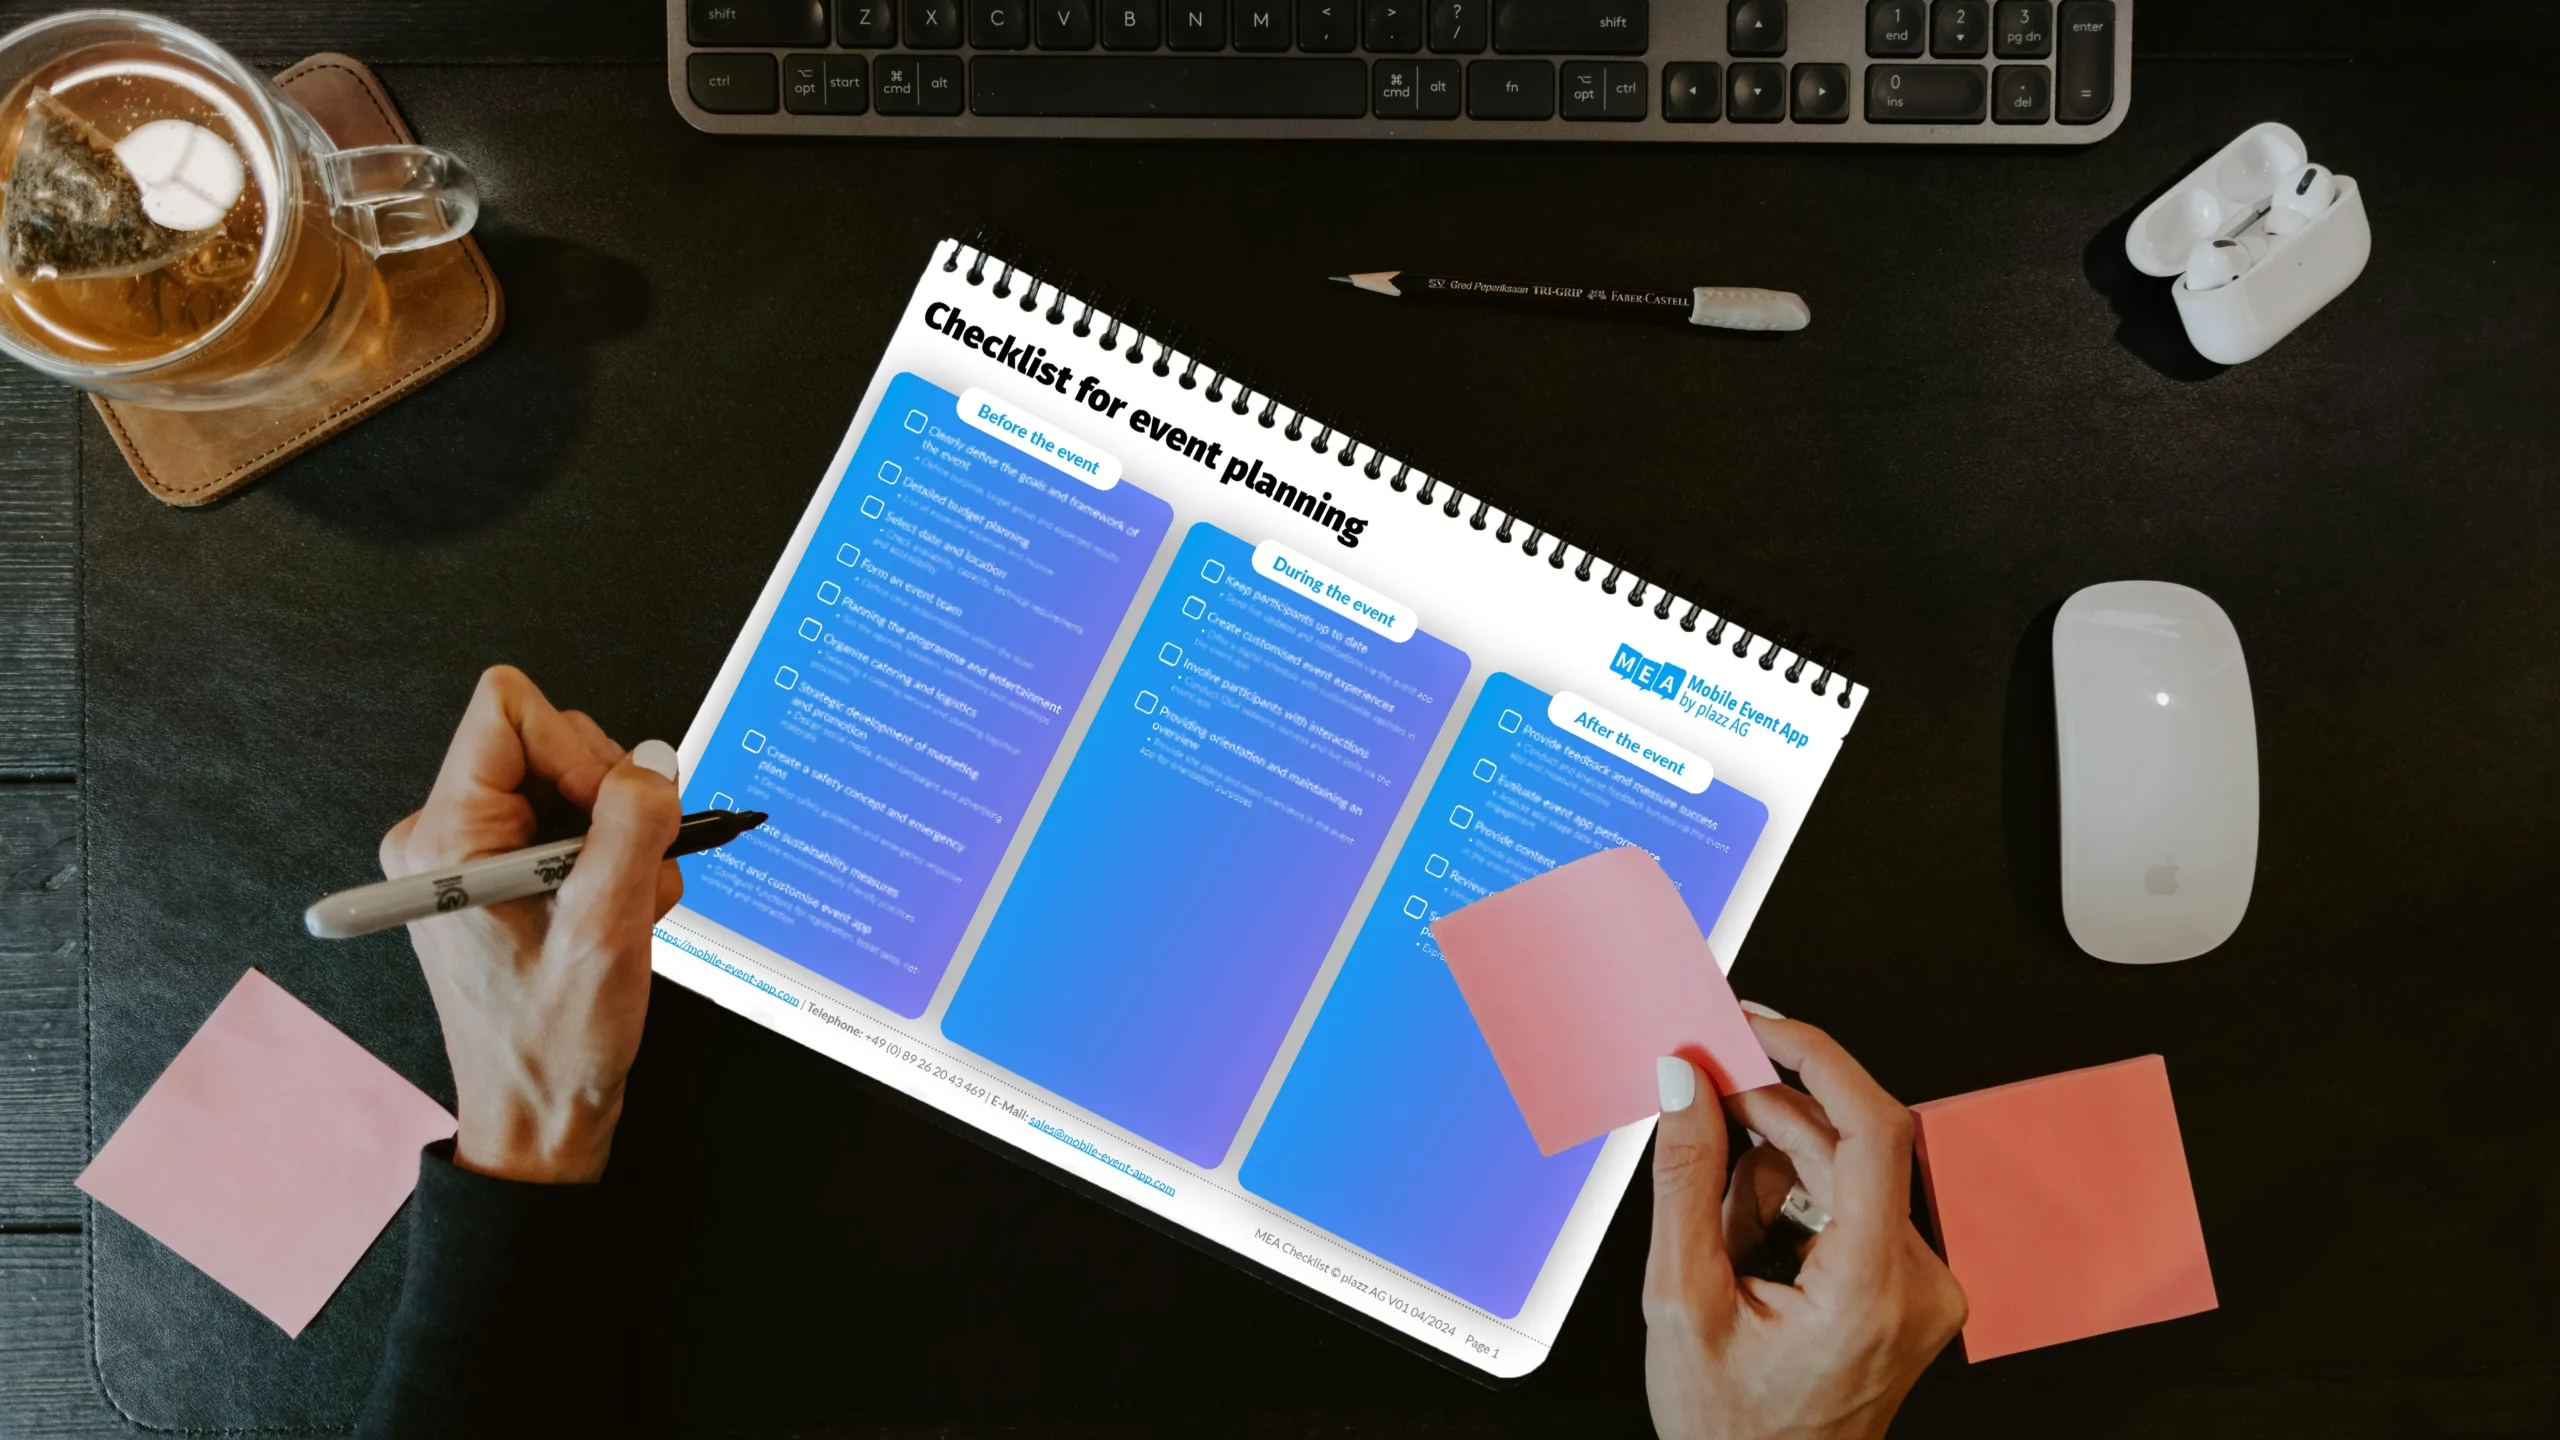 Checklist for event planning